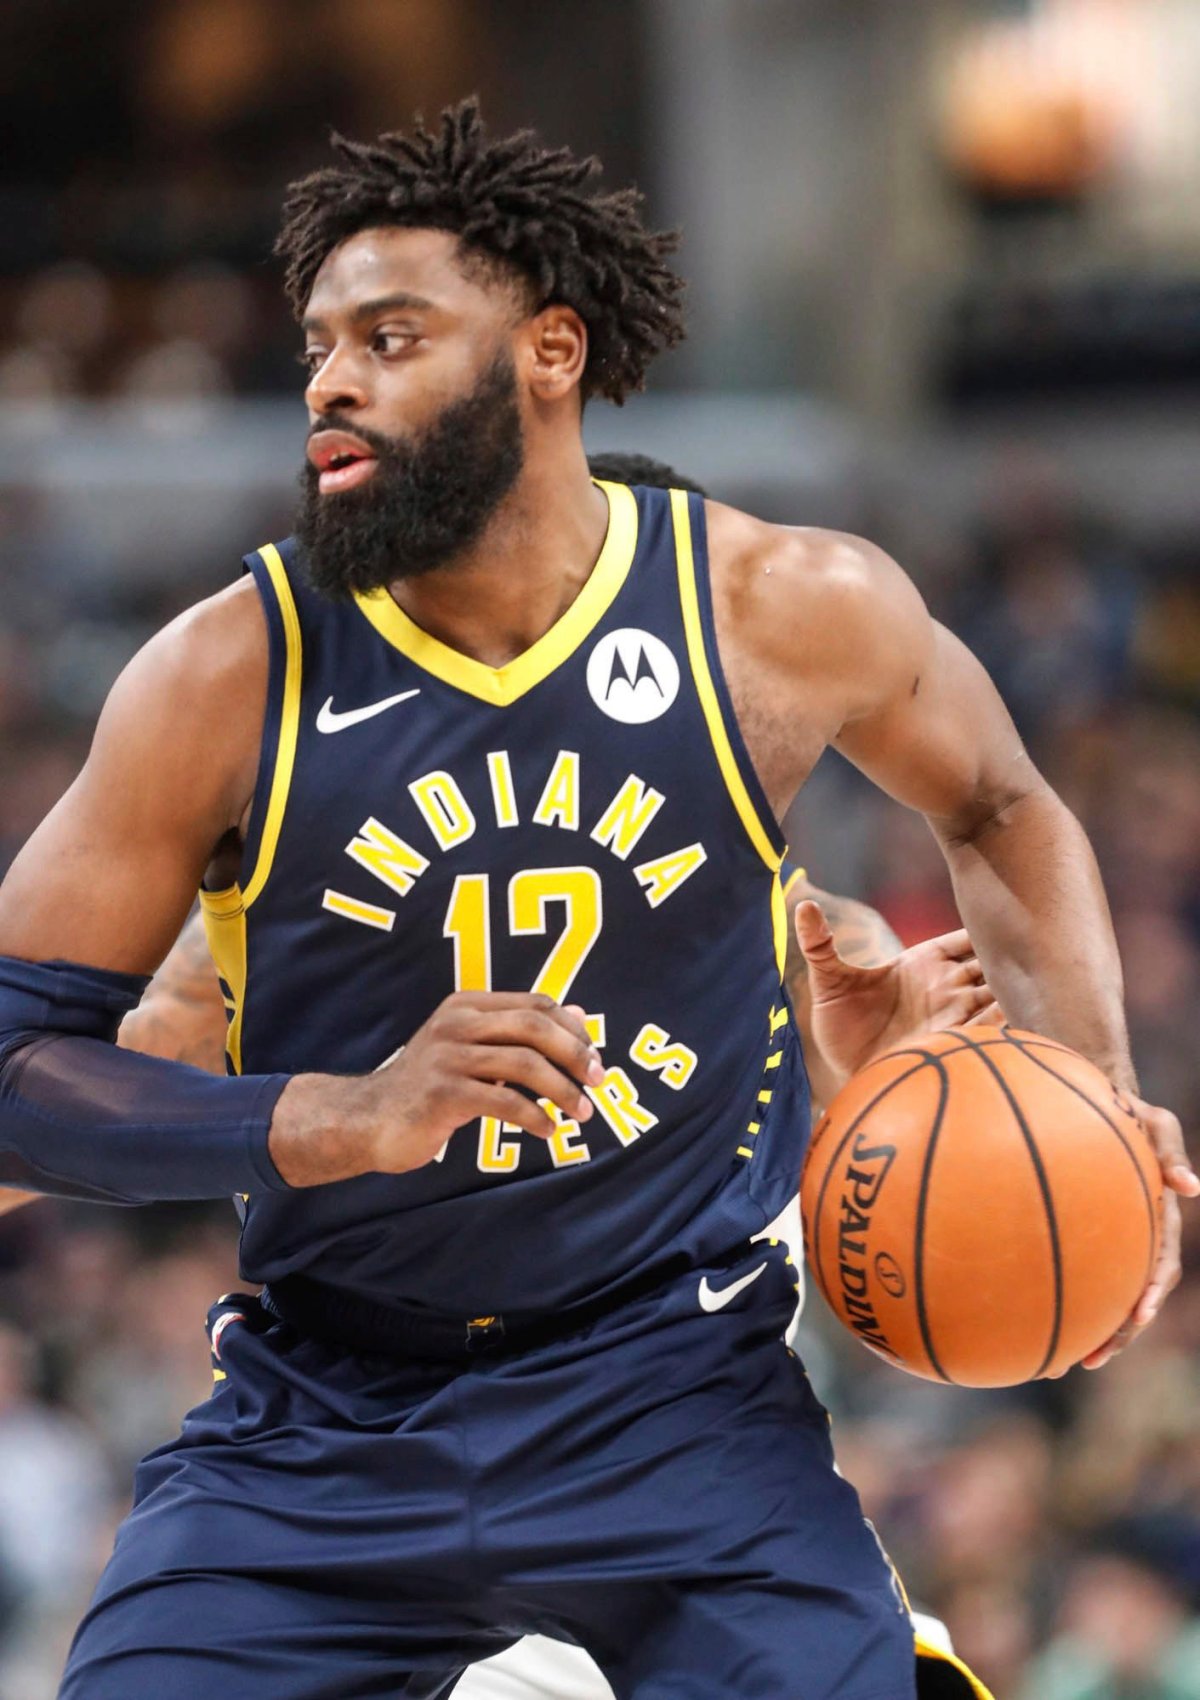 Indiana Pacers guard Tyreke Evans (12) drives into the lane during the team's NBA basketball game against the Denver Nuggets on Sunday, March 24, 2019, in Indianapolis.